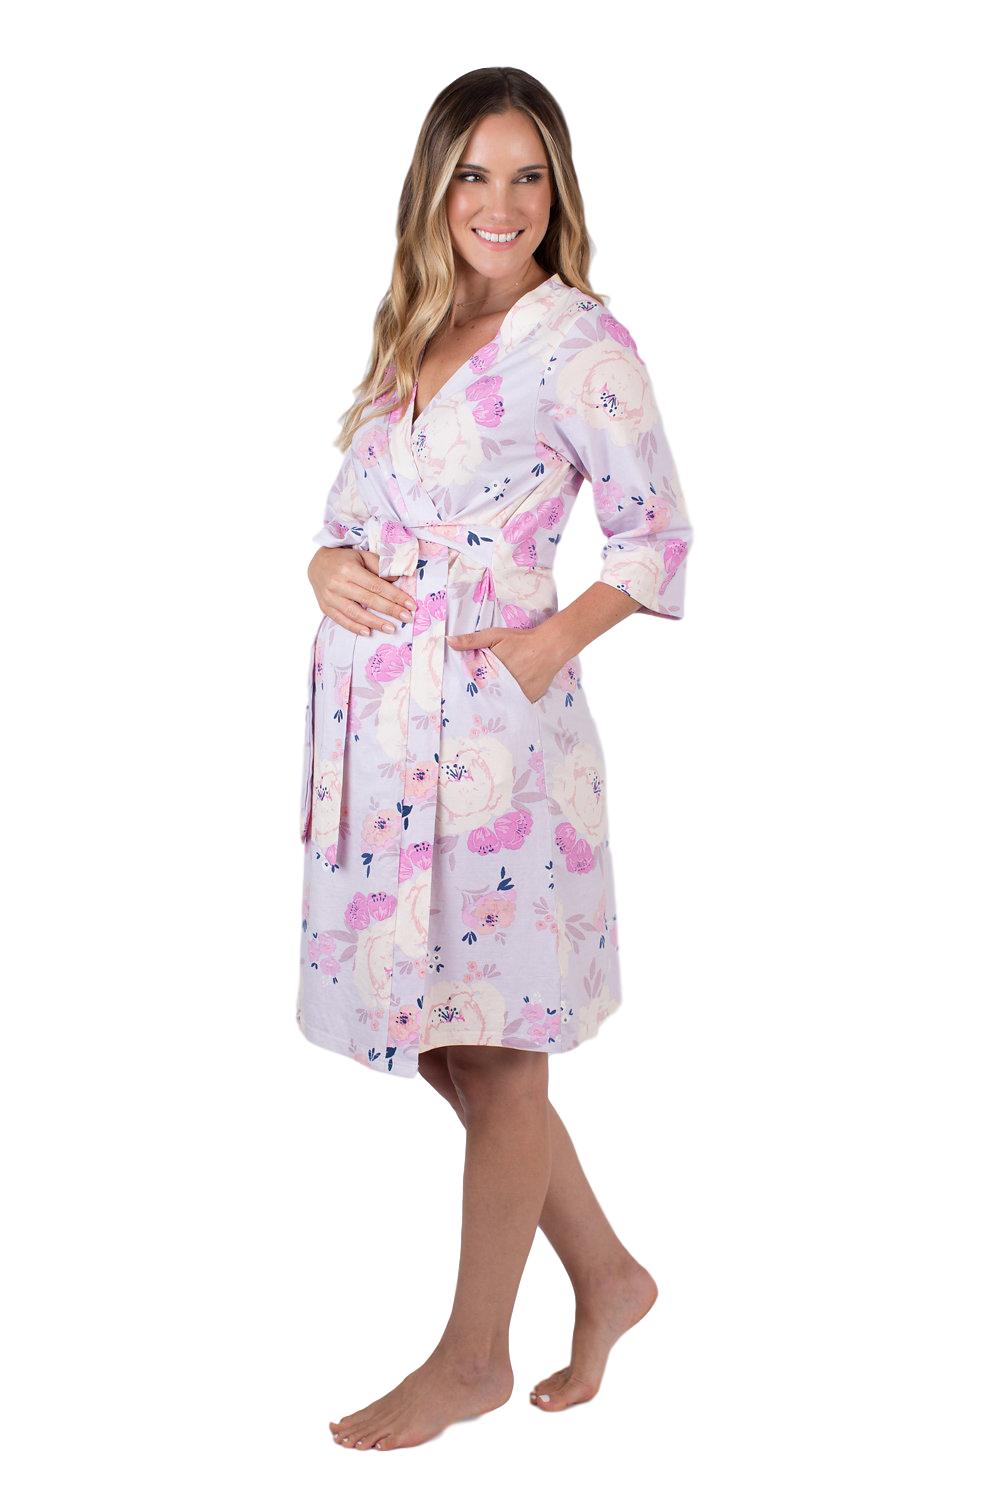 Utopia Care 6 Pack Cotton Blend Unisex Hospital Gown, Fits Sizes Up To 2Xl  Blue - Walmart.ca